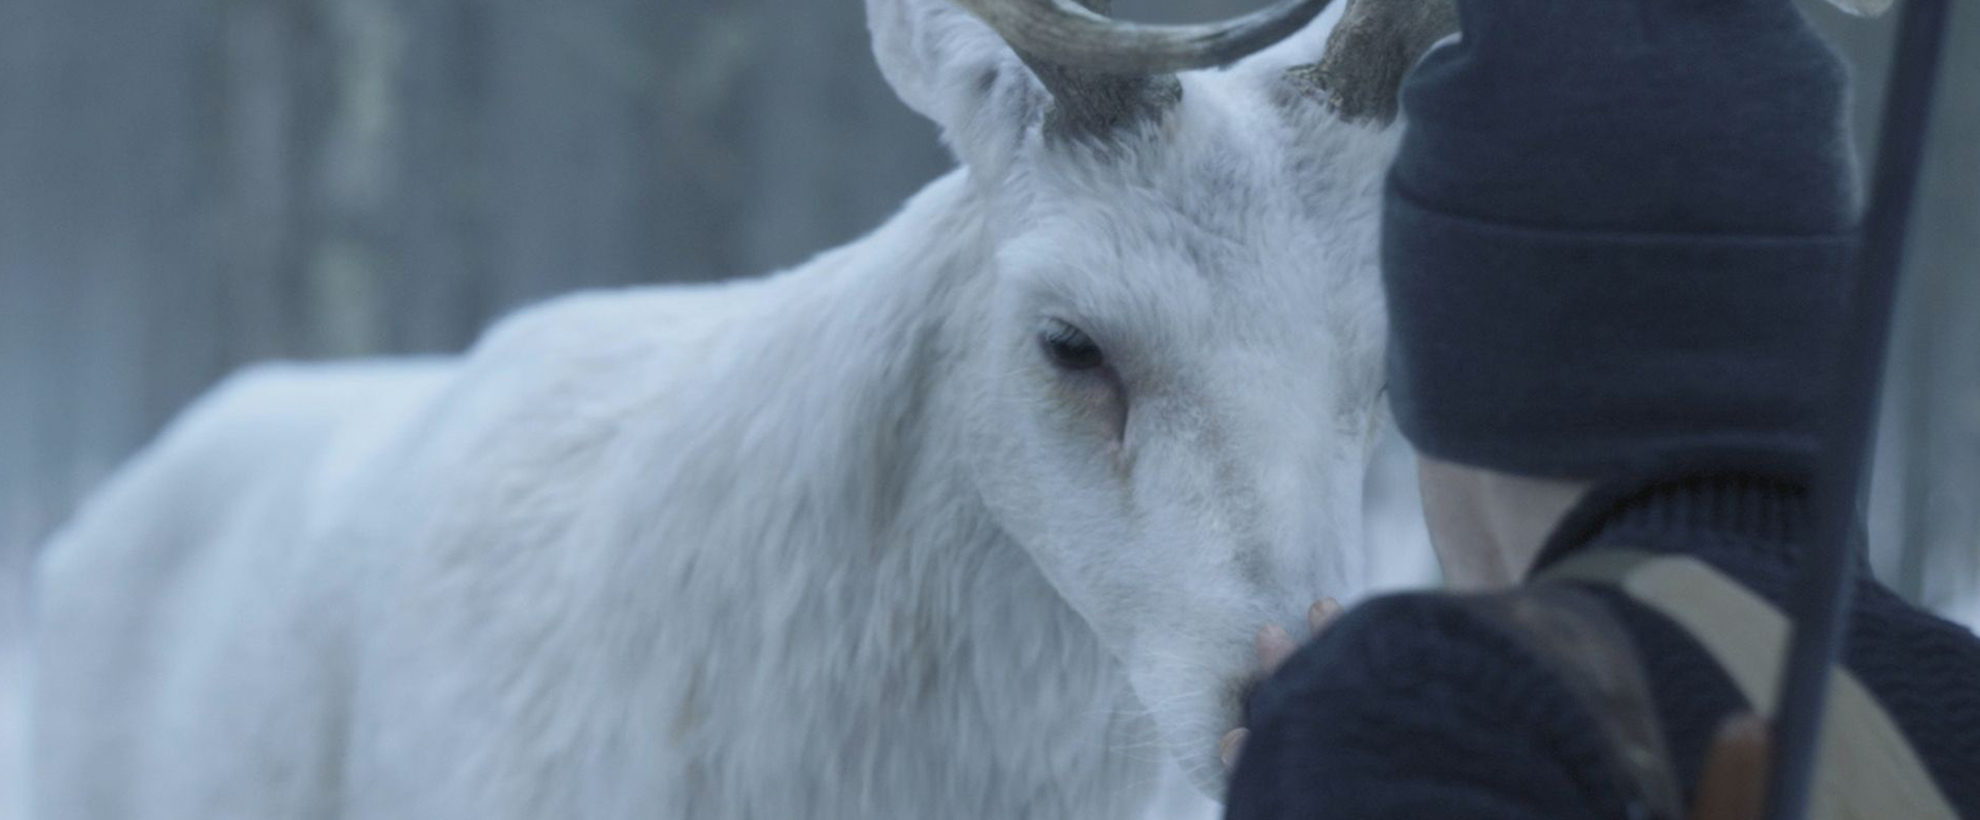 A modern day hunter encounters a white reindeer